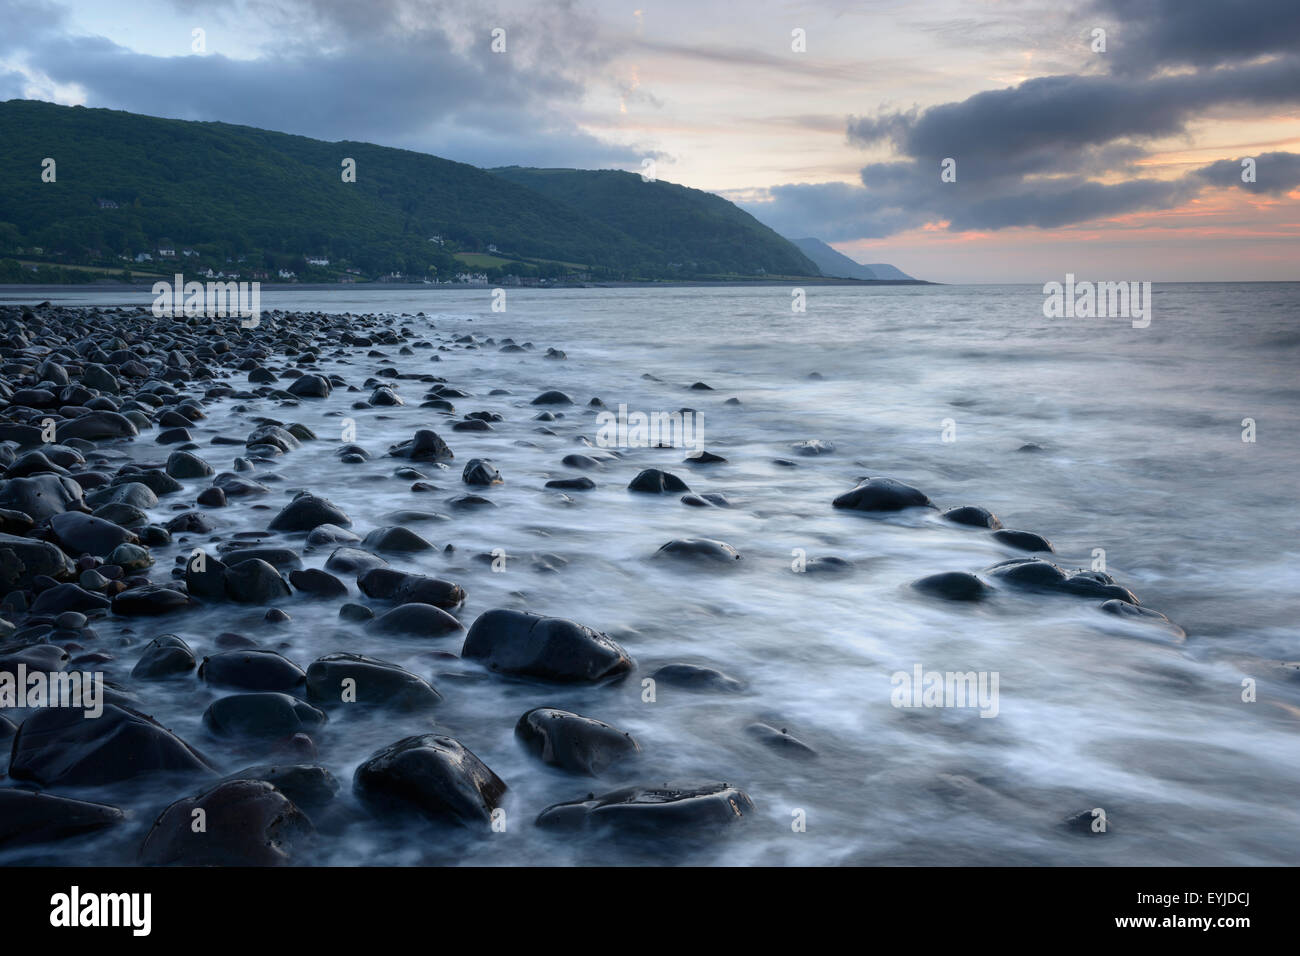 Sunset over Bossington Beach with Porlock Weir and the hills of Exmoor in the distance. Stock Photo